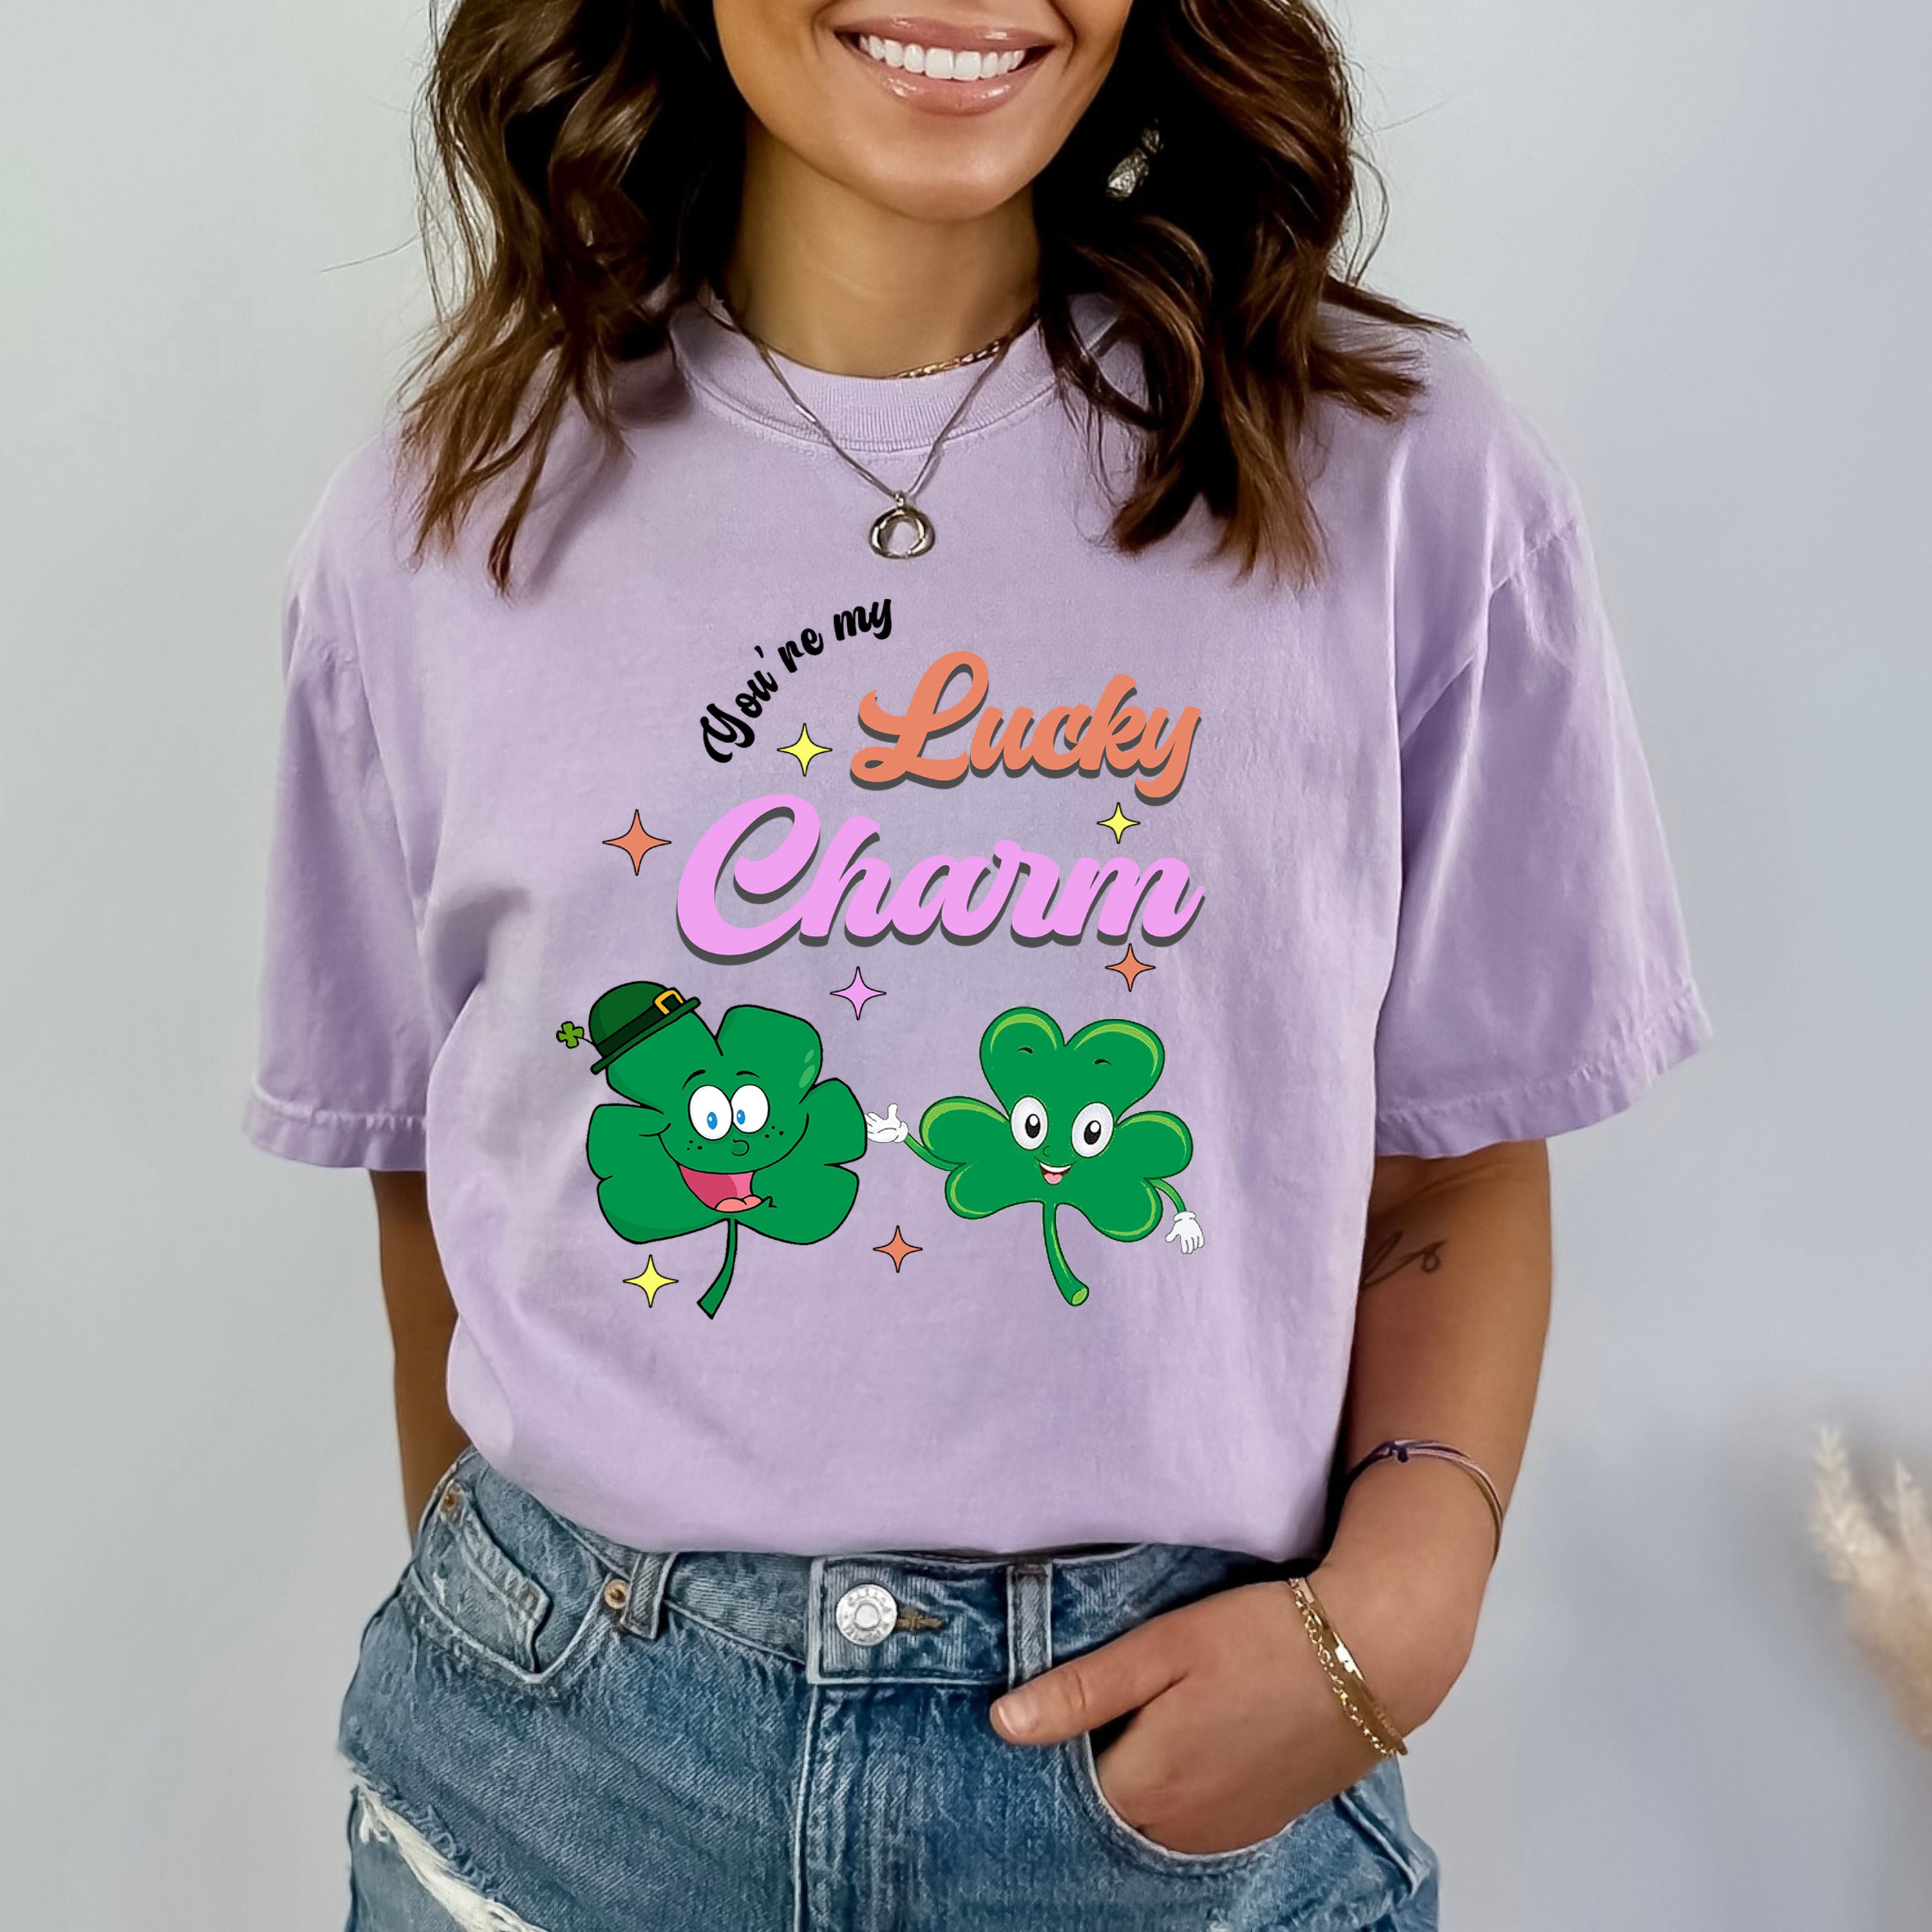 You're My Lucky Charm - Bella canvas